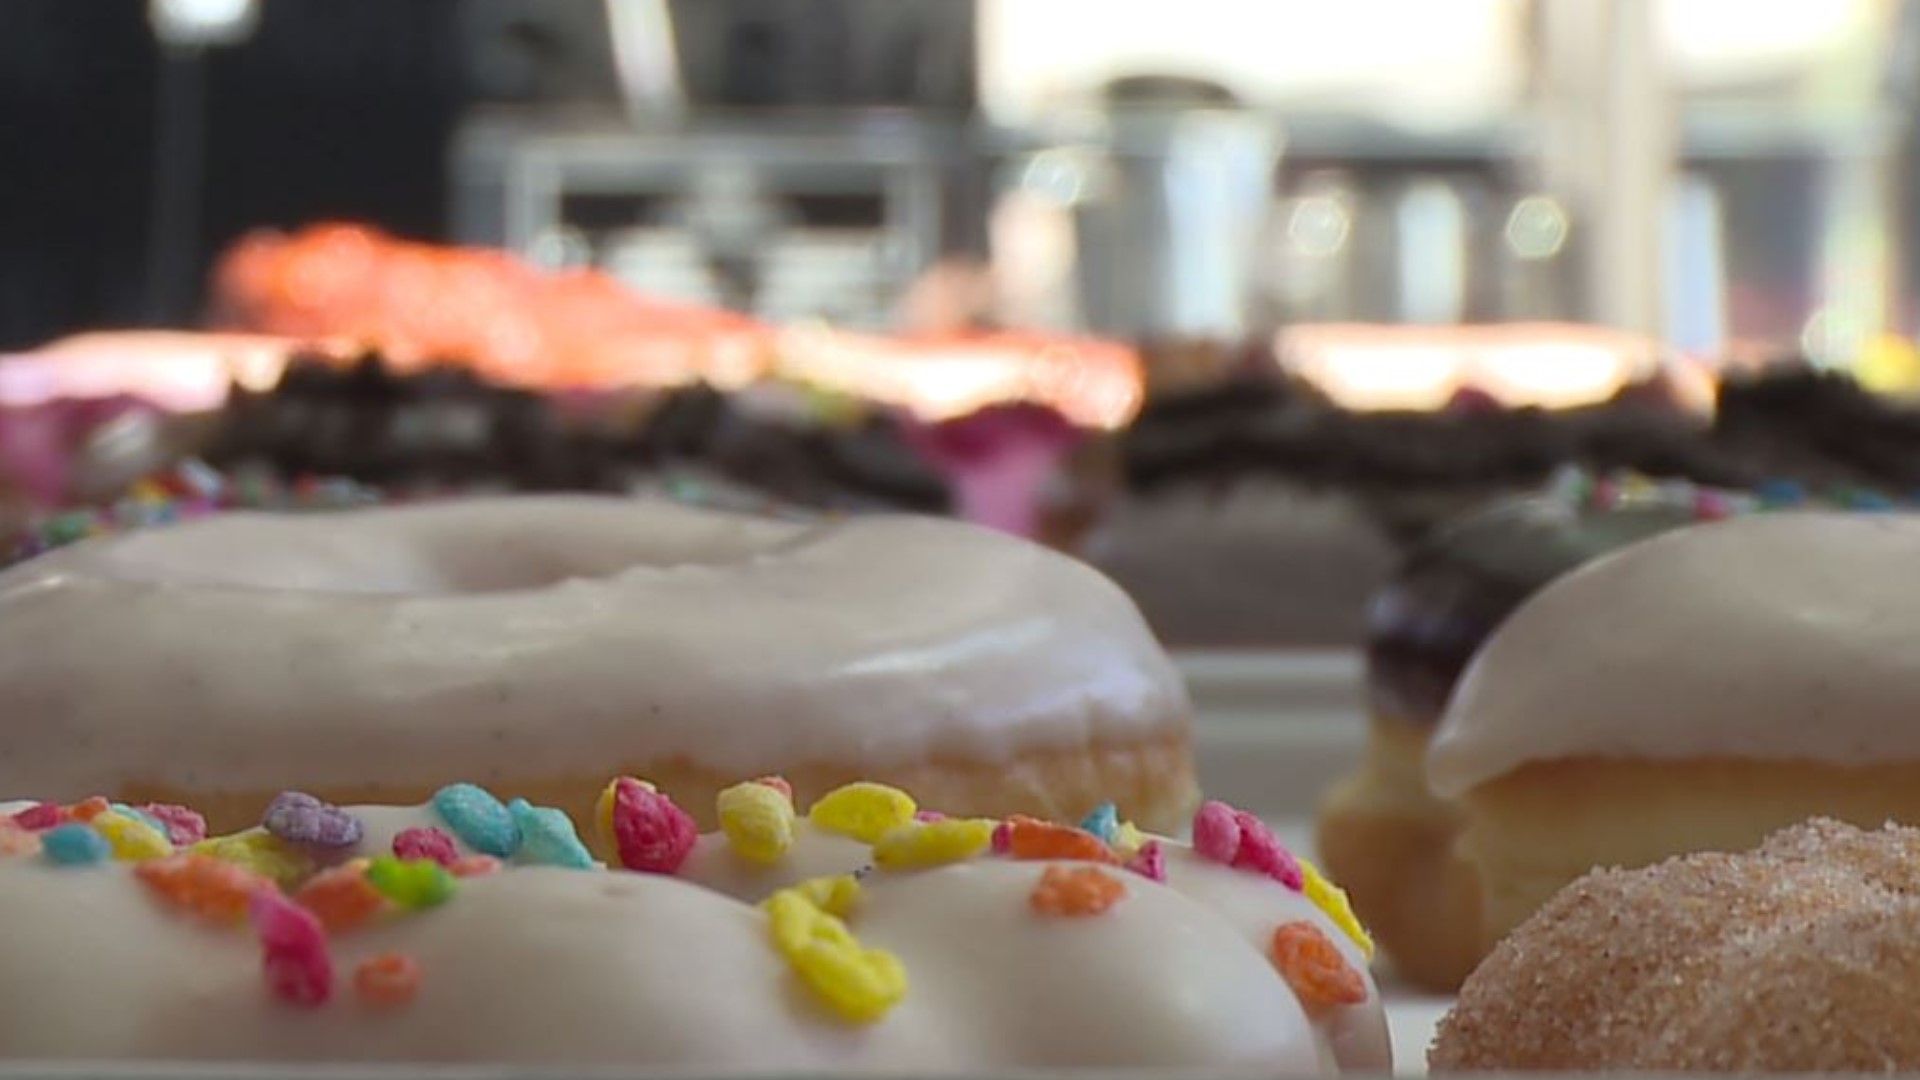 Milkvue Handcrafted Donuts treats every batch like an art project. Sponsored by South Sound Magazine. #k5evening